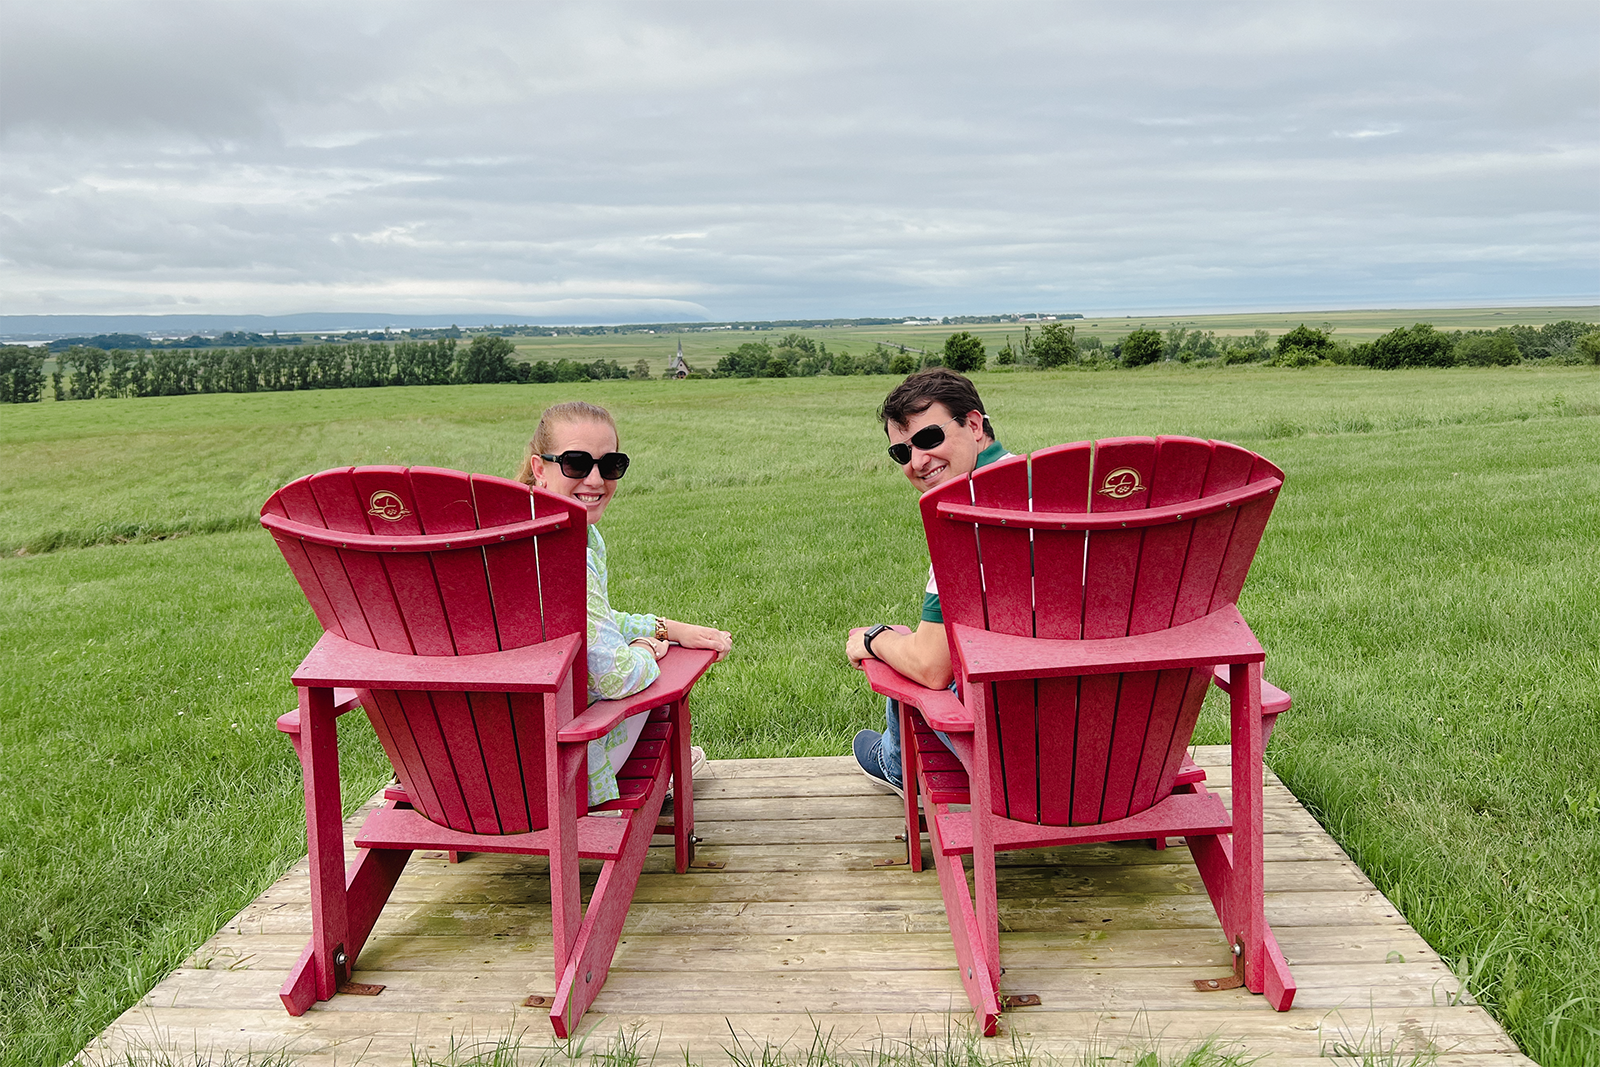 Nick Ewen and his wife in the Nova Scotia countryside, enjoying the view